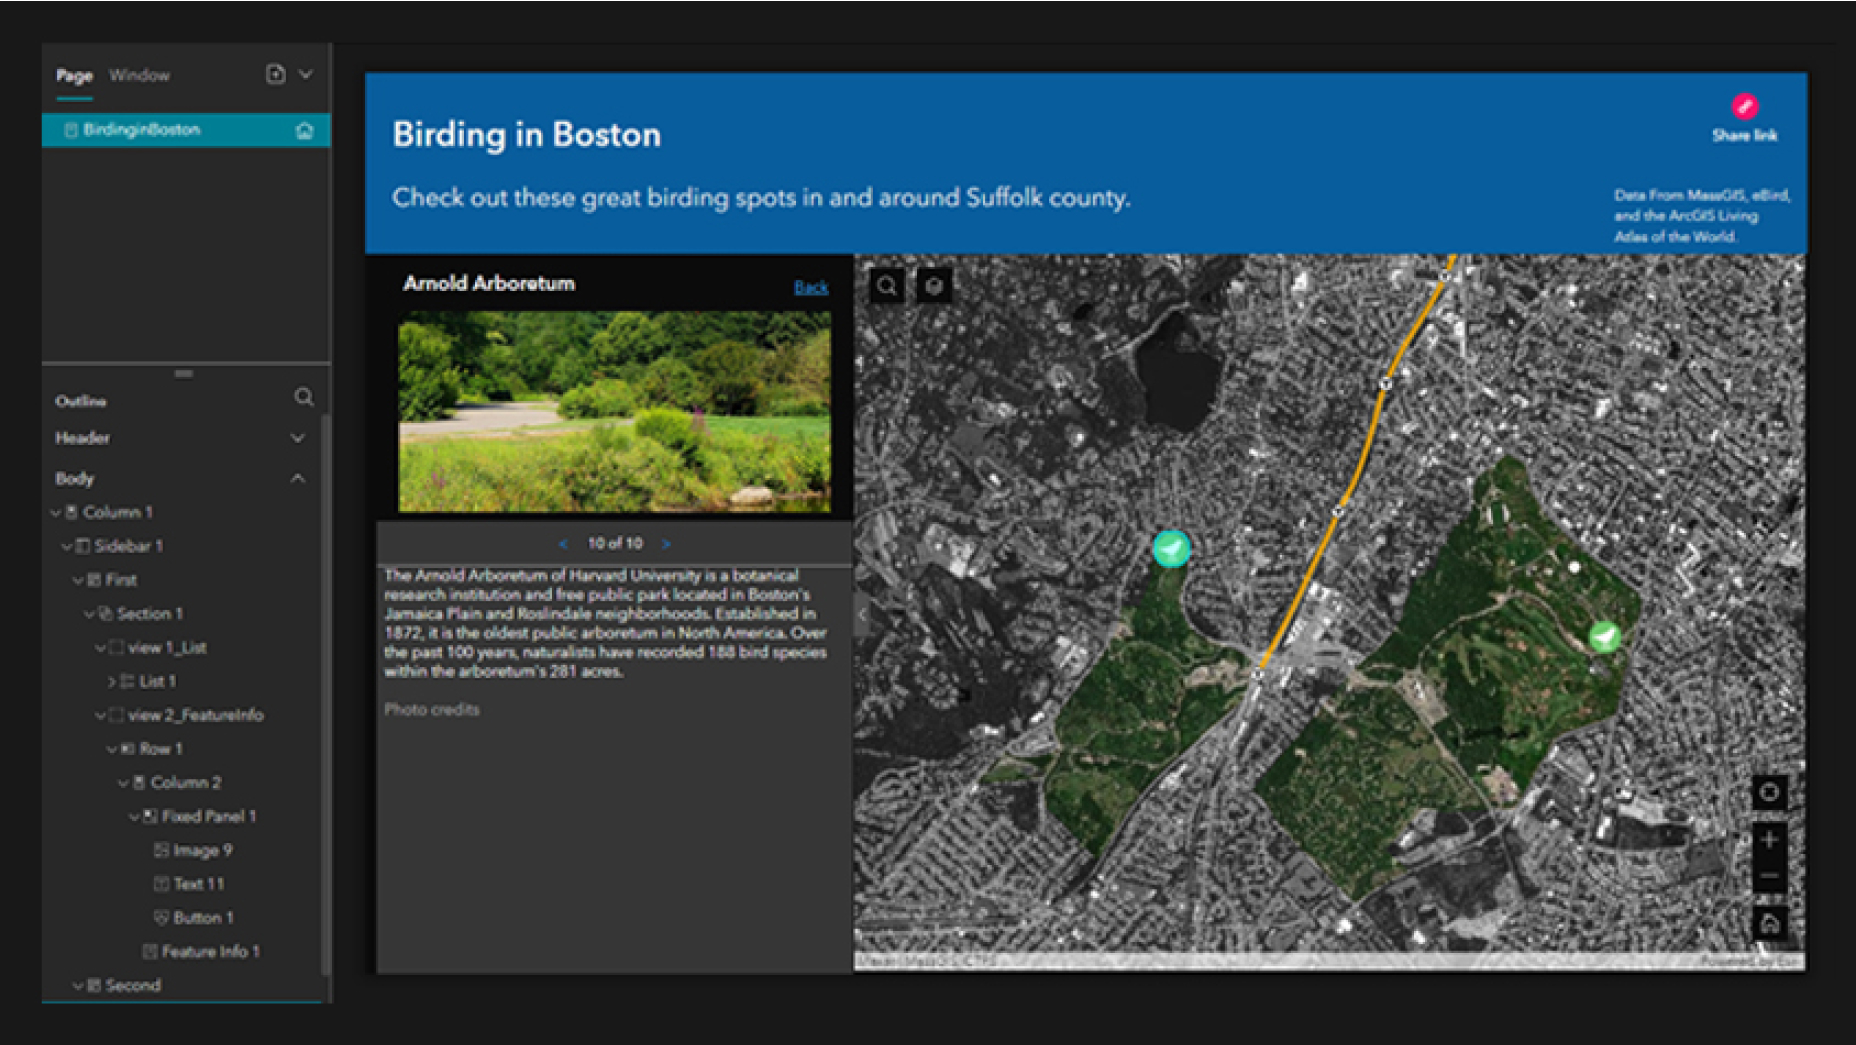 A city map and an image of greenery on a Birding in Boston page in the Experience Builder app